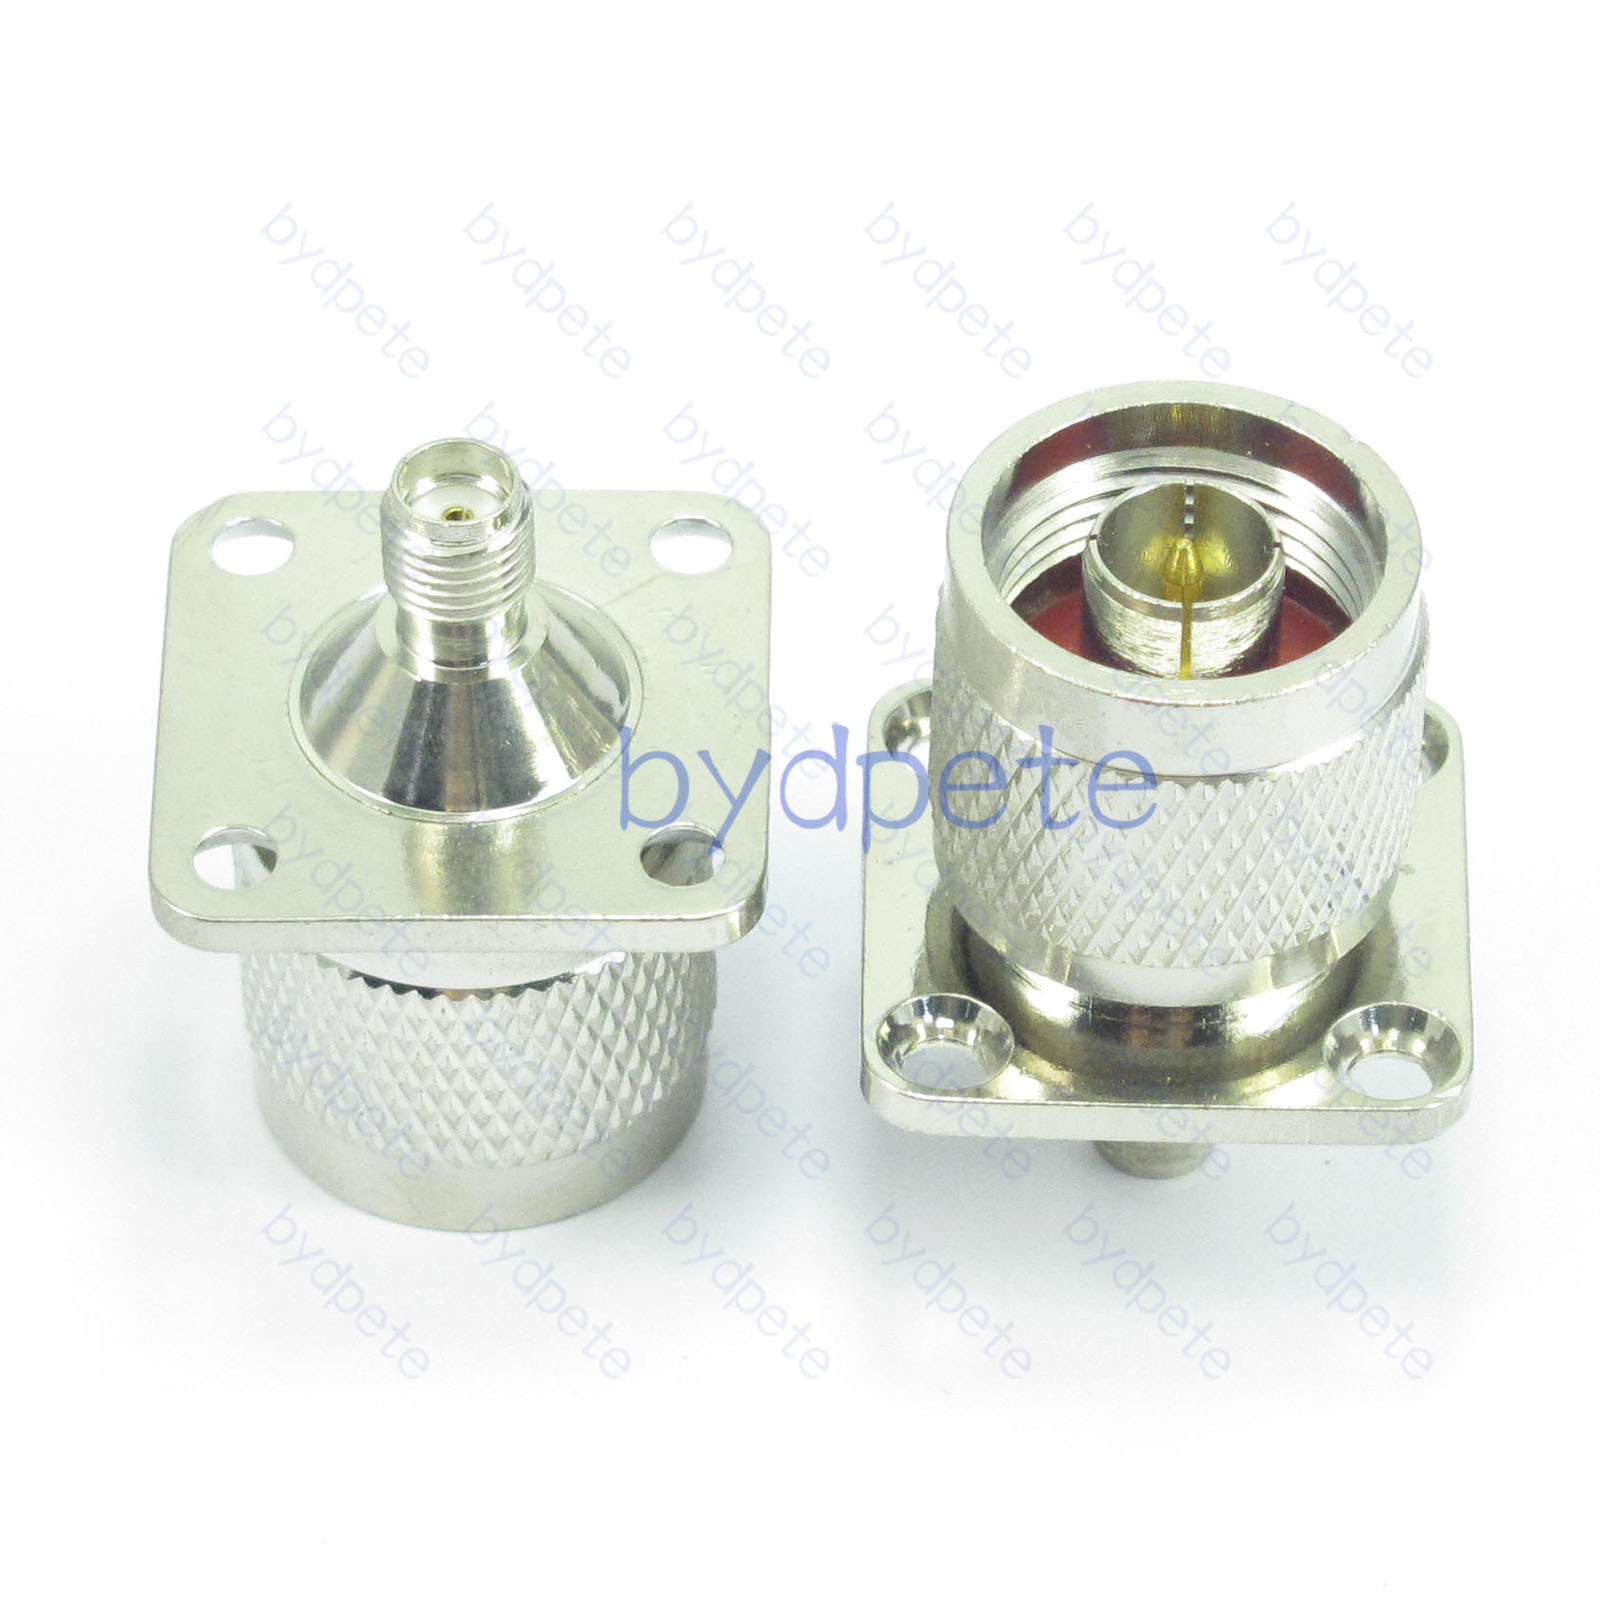 N Male Plug to SMA Female Jack 4 Hole Square Panel Straight RF Connector Adapter bydpete BYDB022NH4